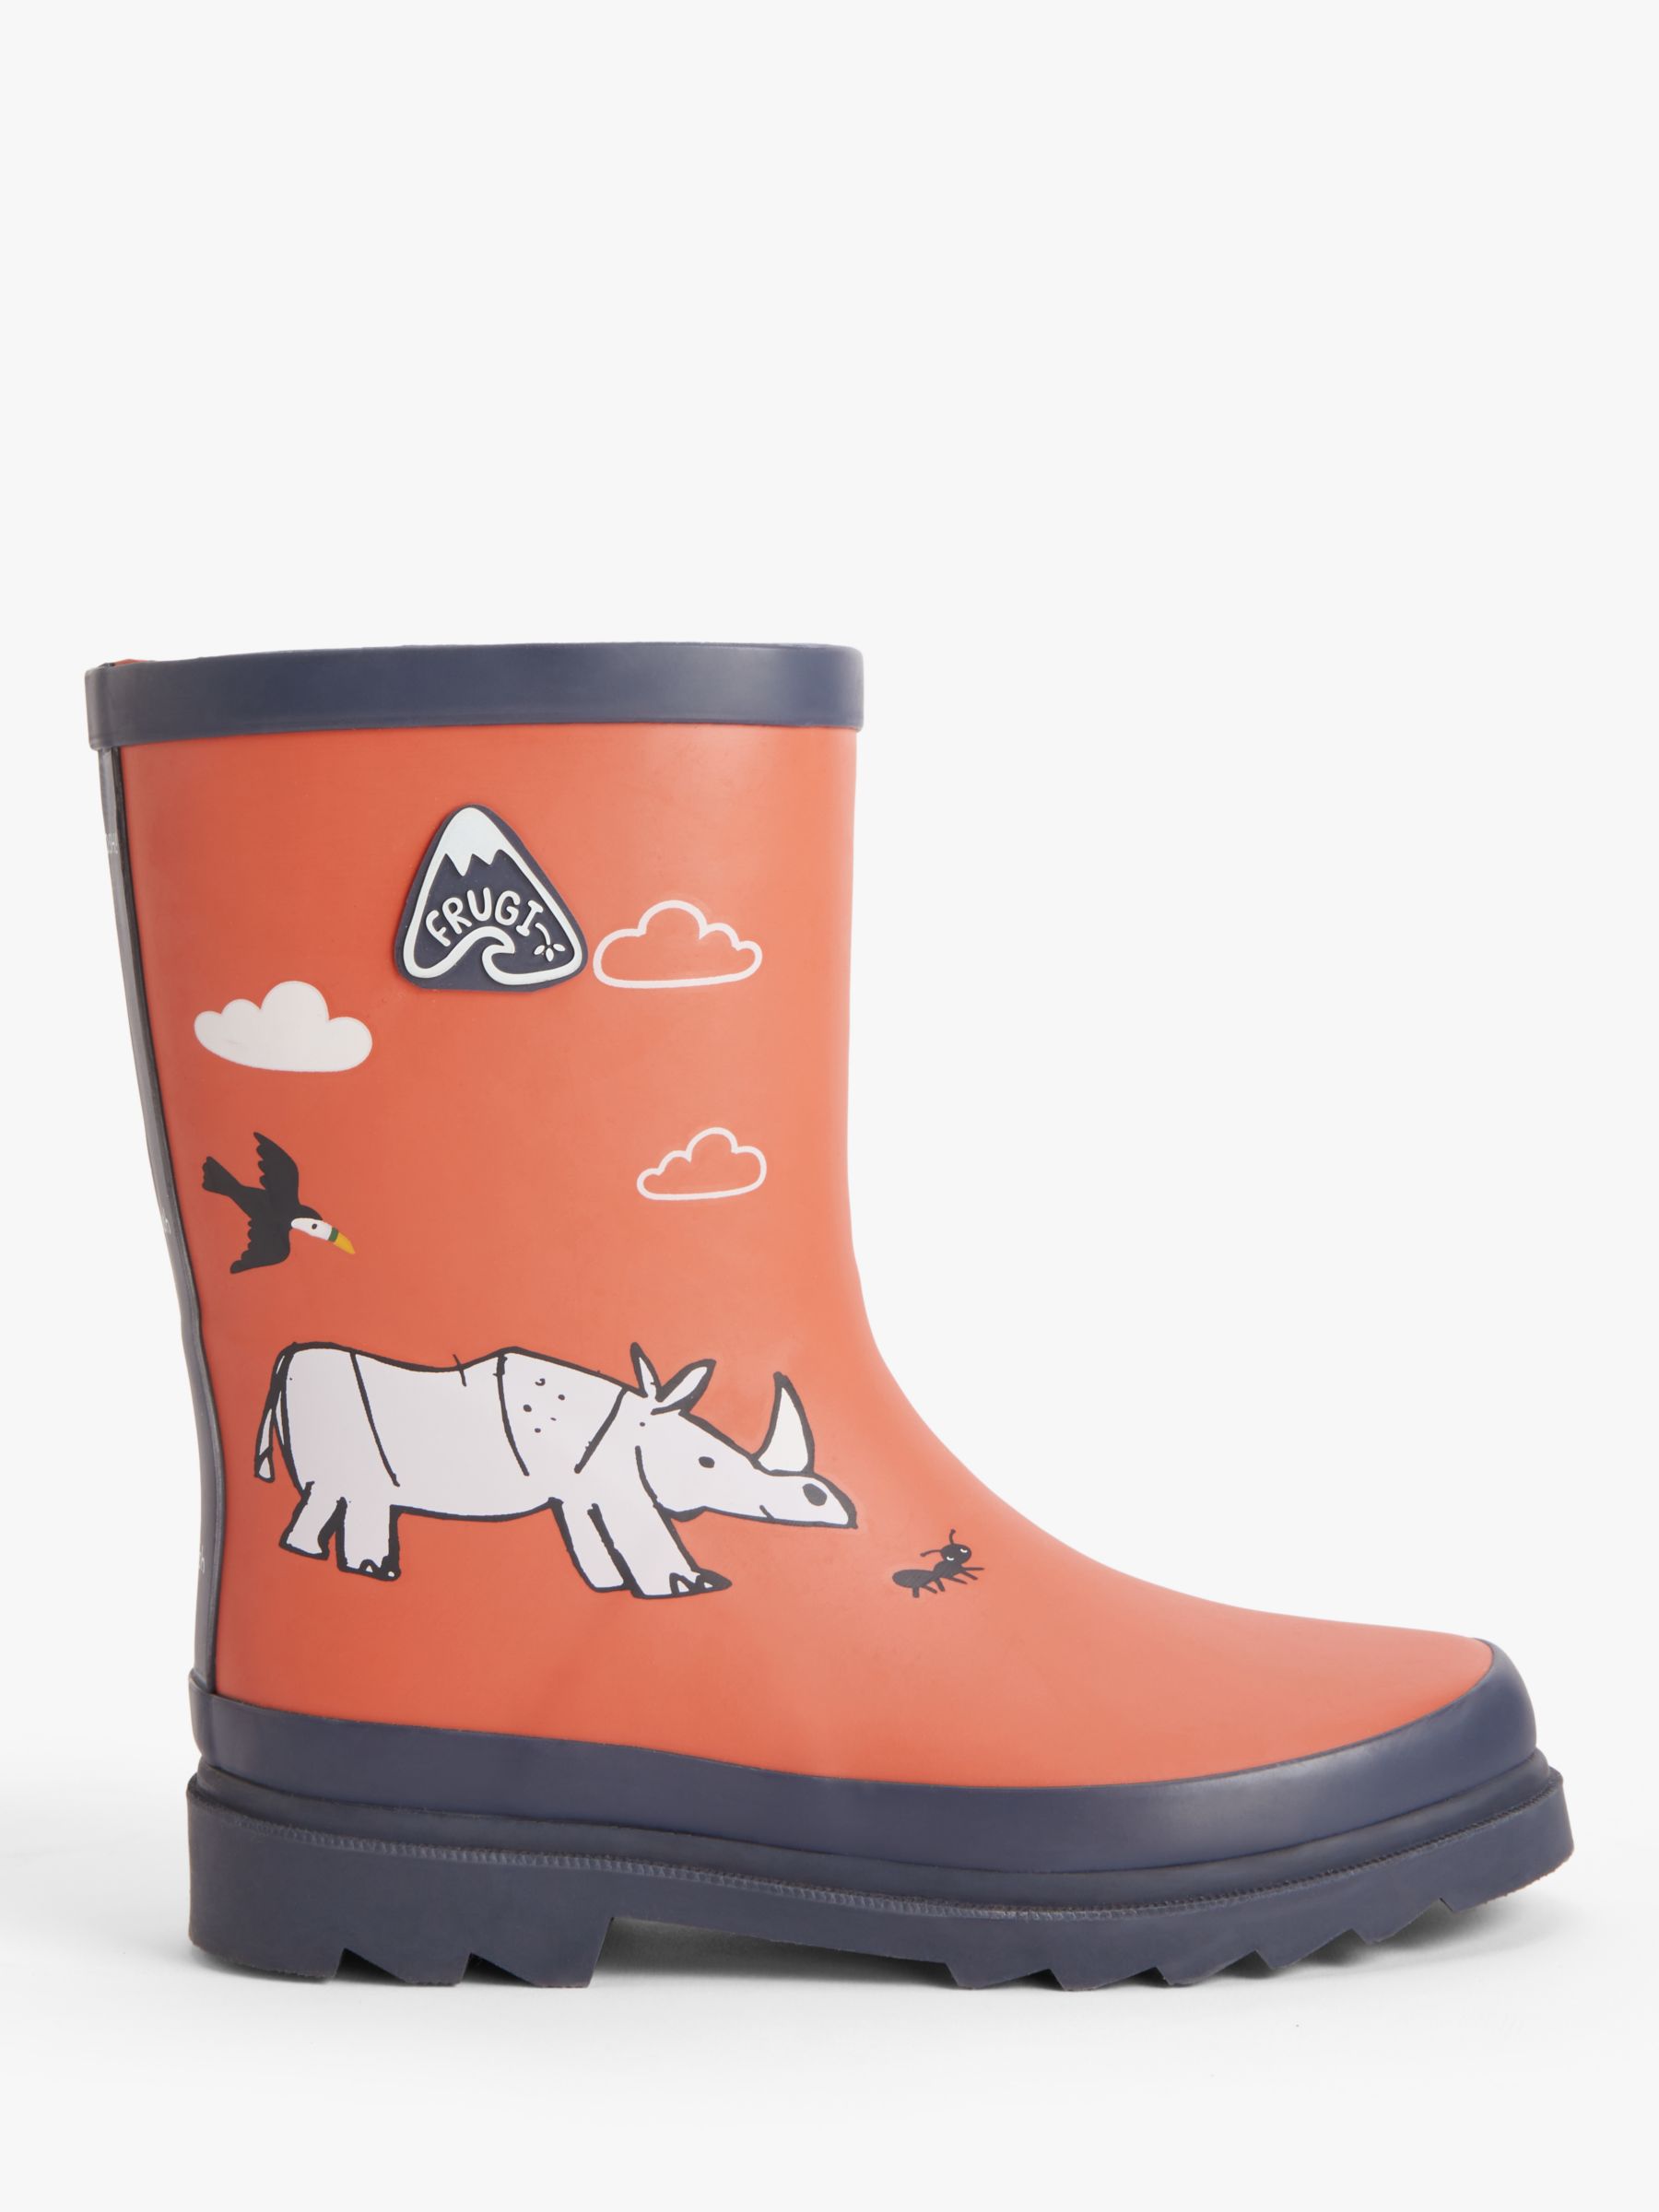 Frugi Kids' Puddle Buster Wellington Boots, Rhino Friends at John Lewis ...